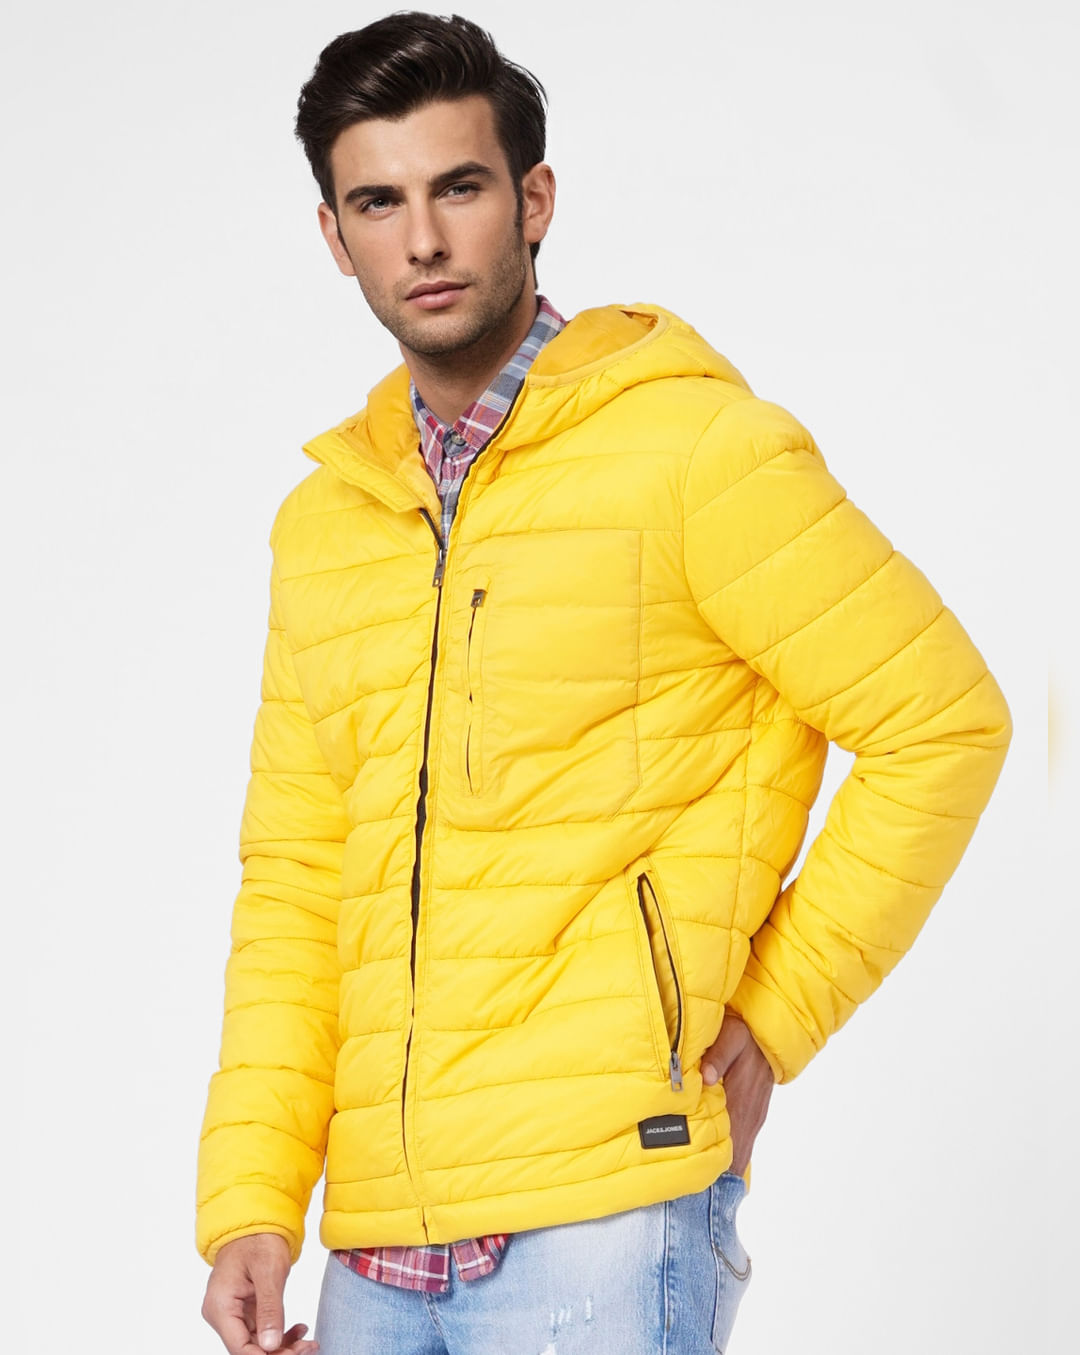 Buy Yellow Hooded Puffer Jacket Online in India - Flat 50% Off